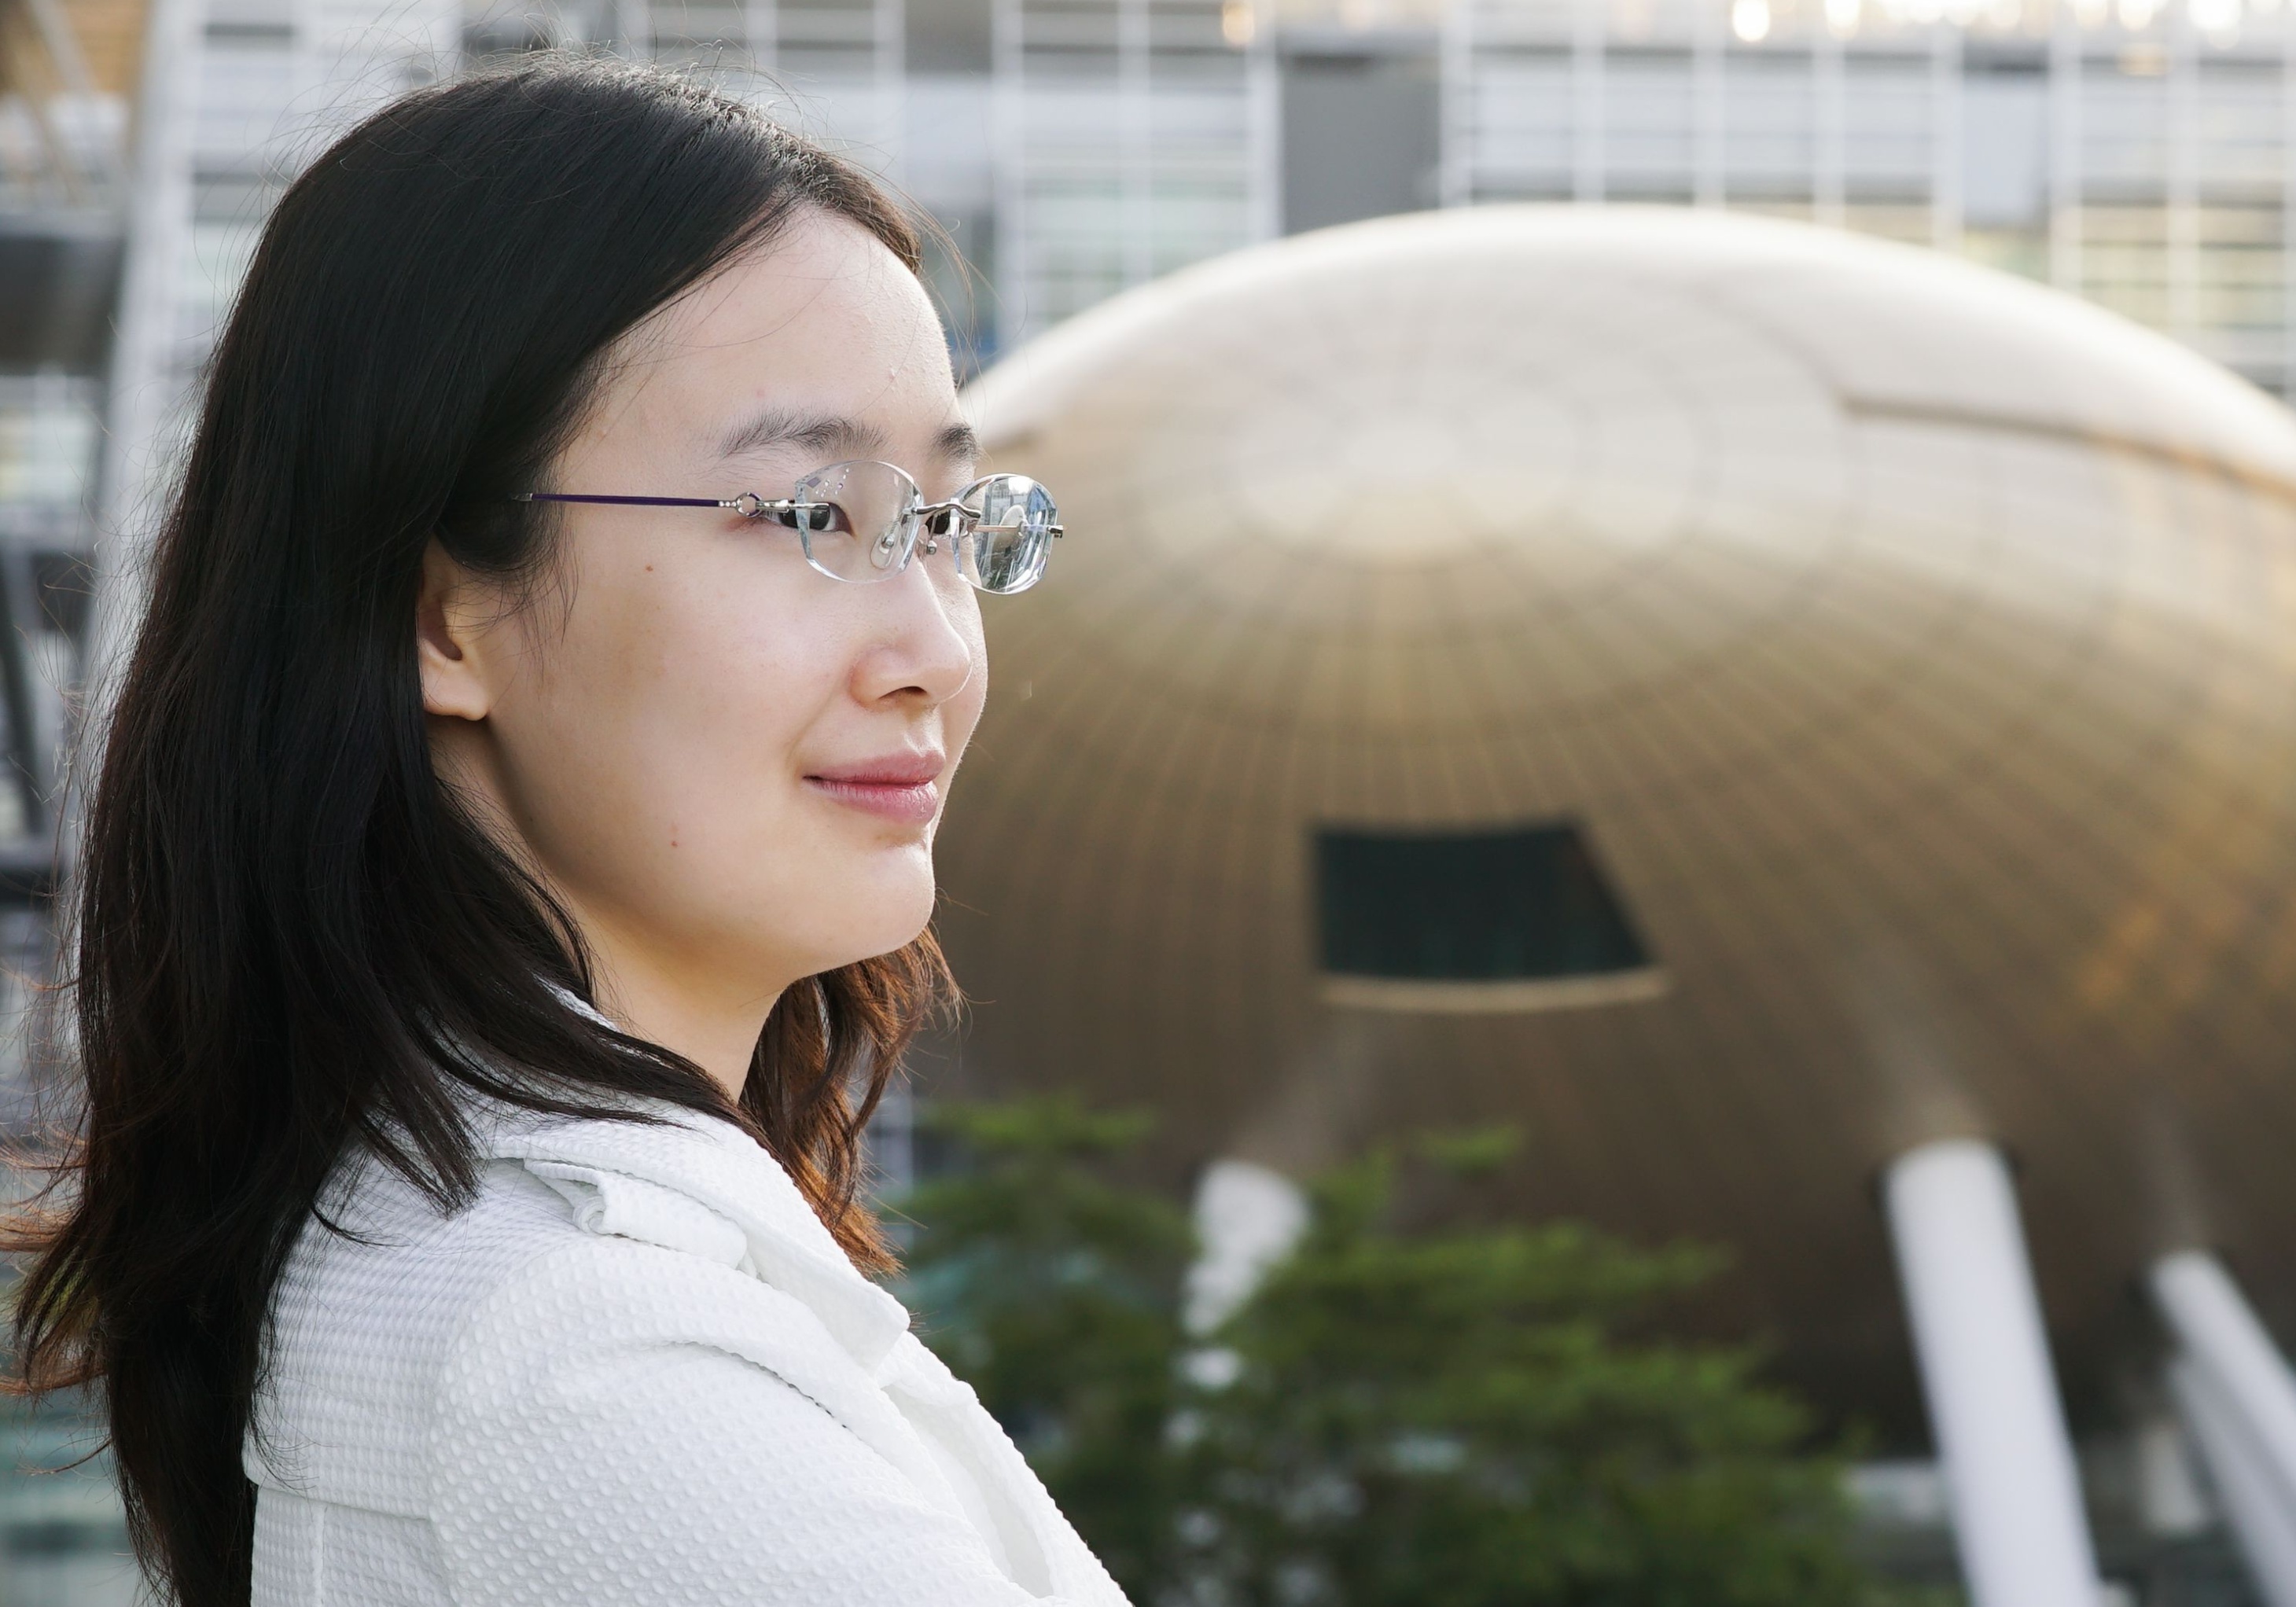 "Haoqi (curiosity) is my name. We live in an era of Information Technology. We are always in touch with data and AI, and so I’m keen on this."